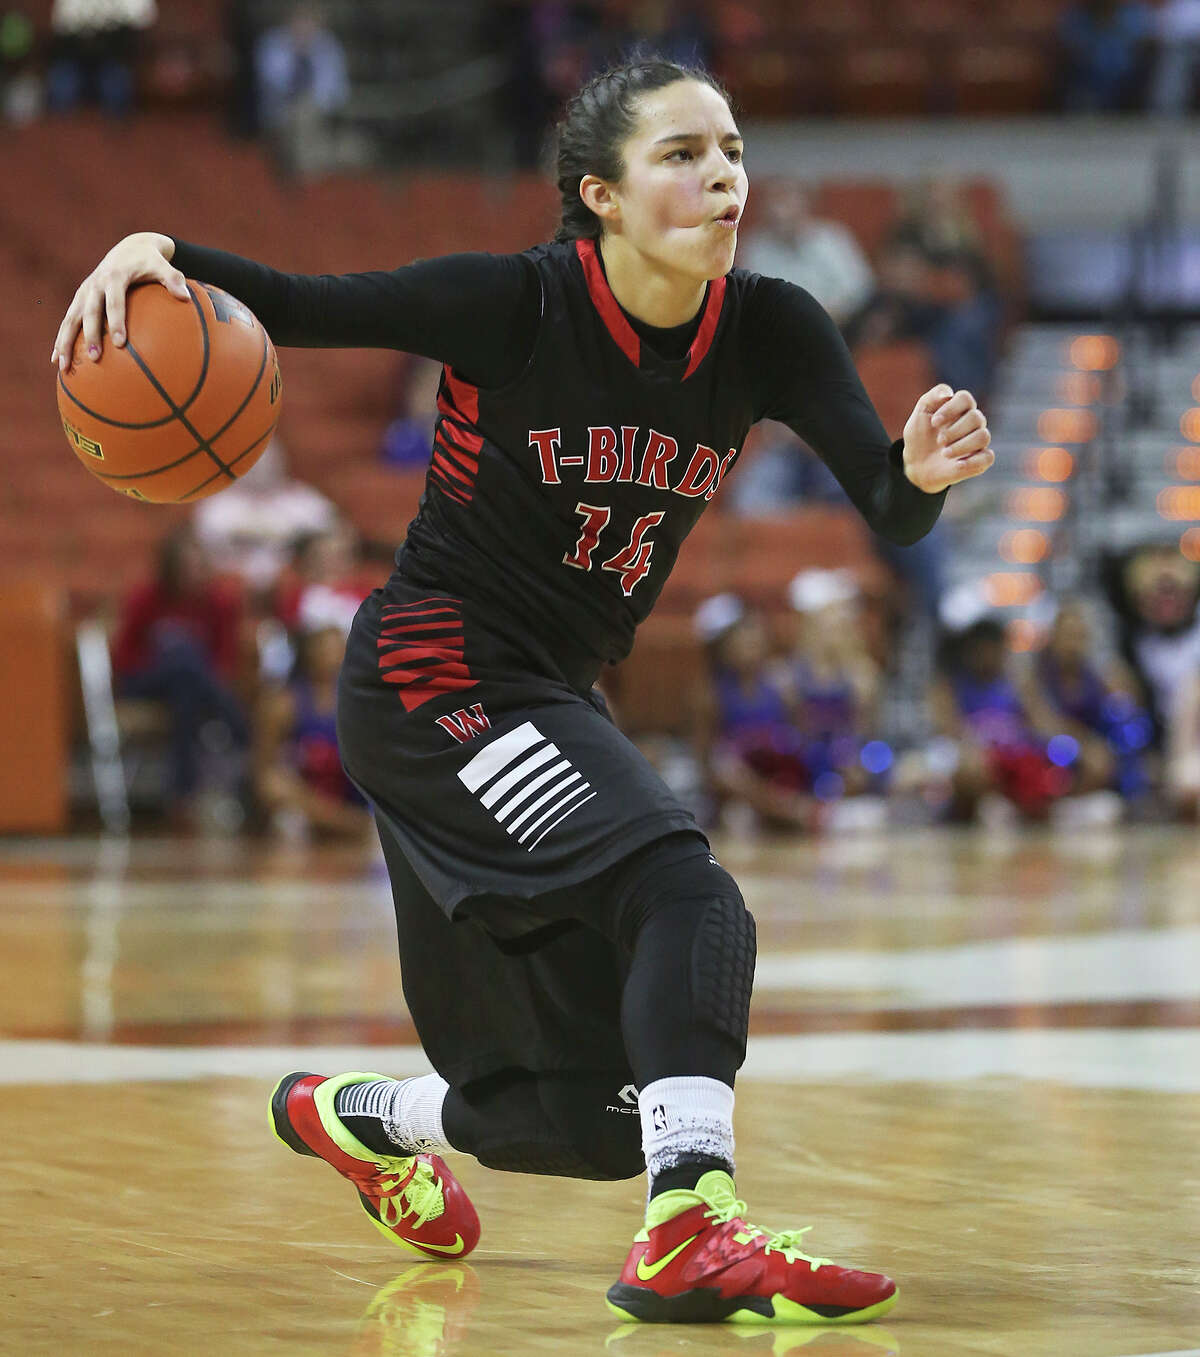 Wagner junior guard Amber Ramirez committed to Oklahoma State two weeks ago.